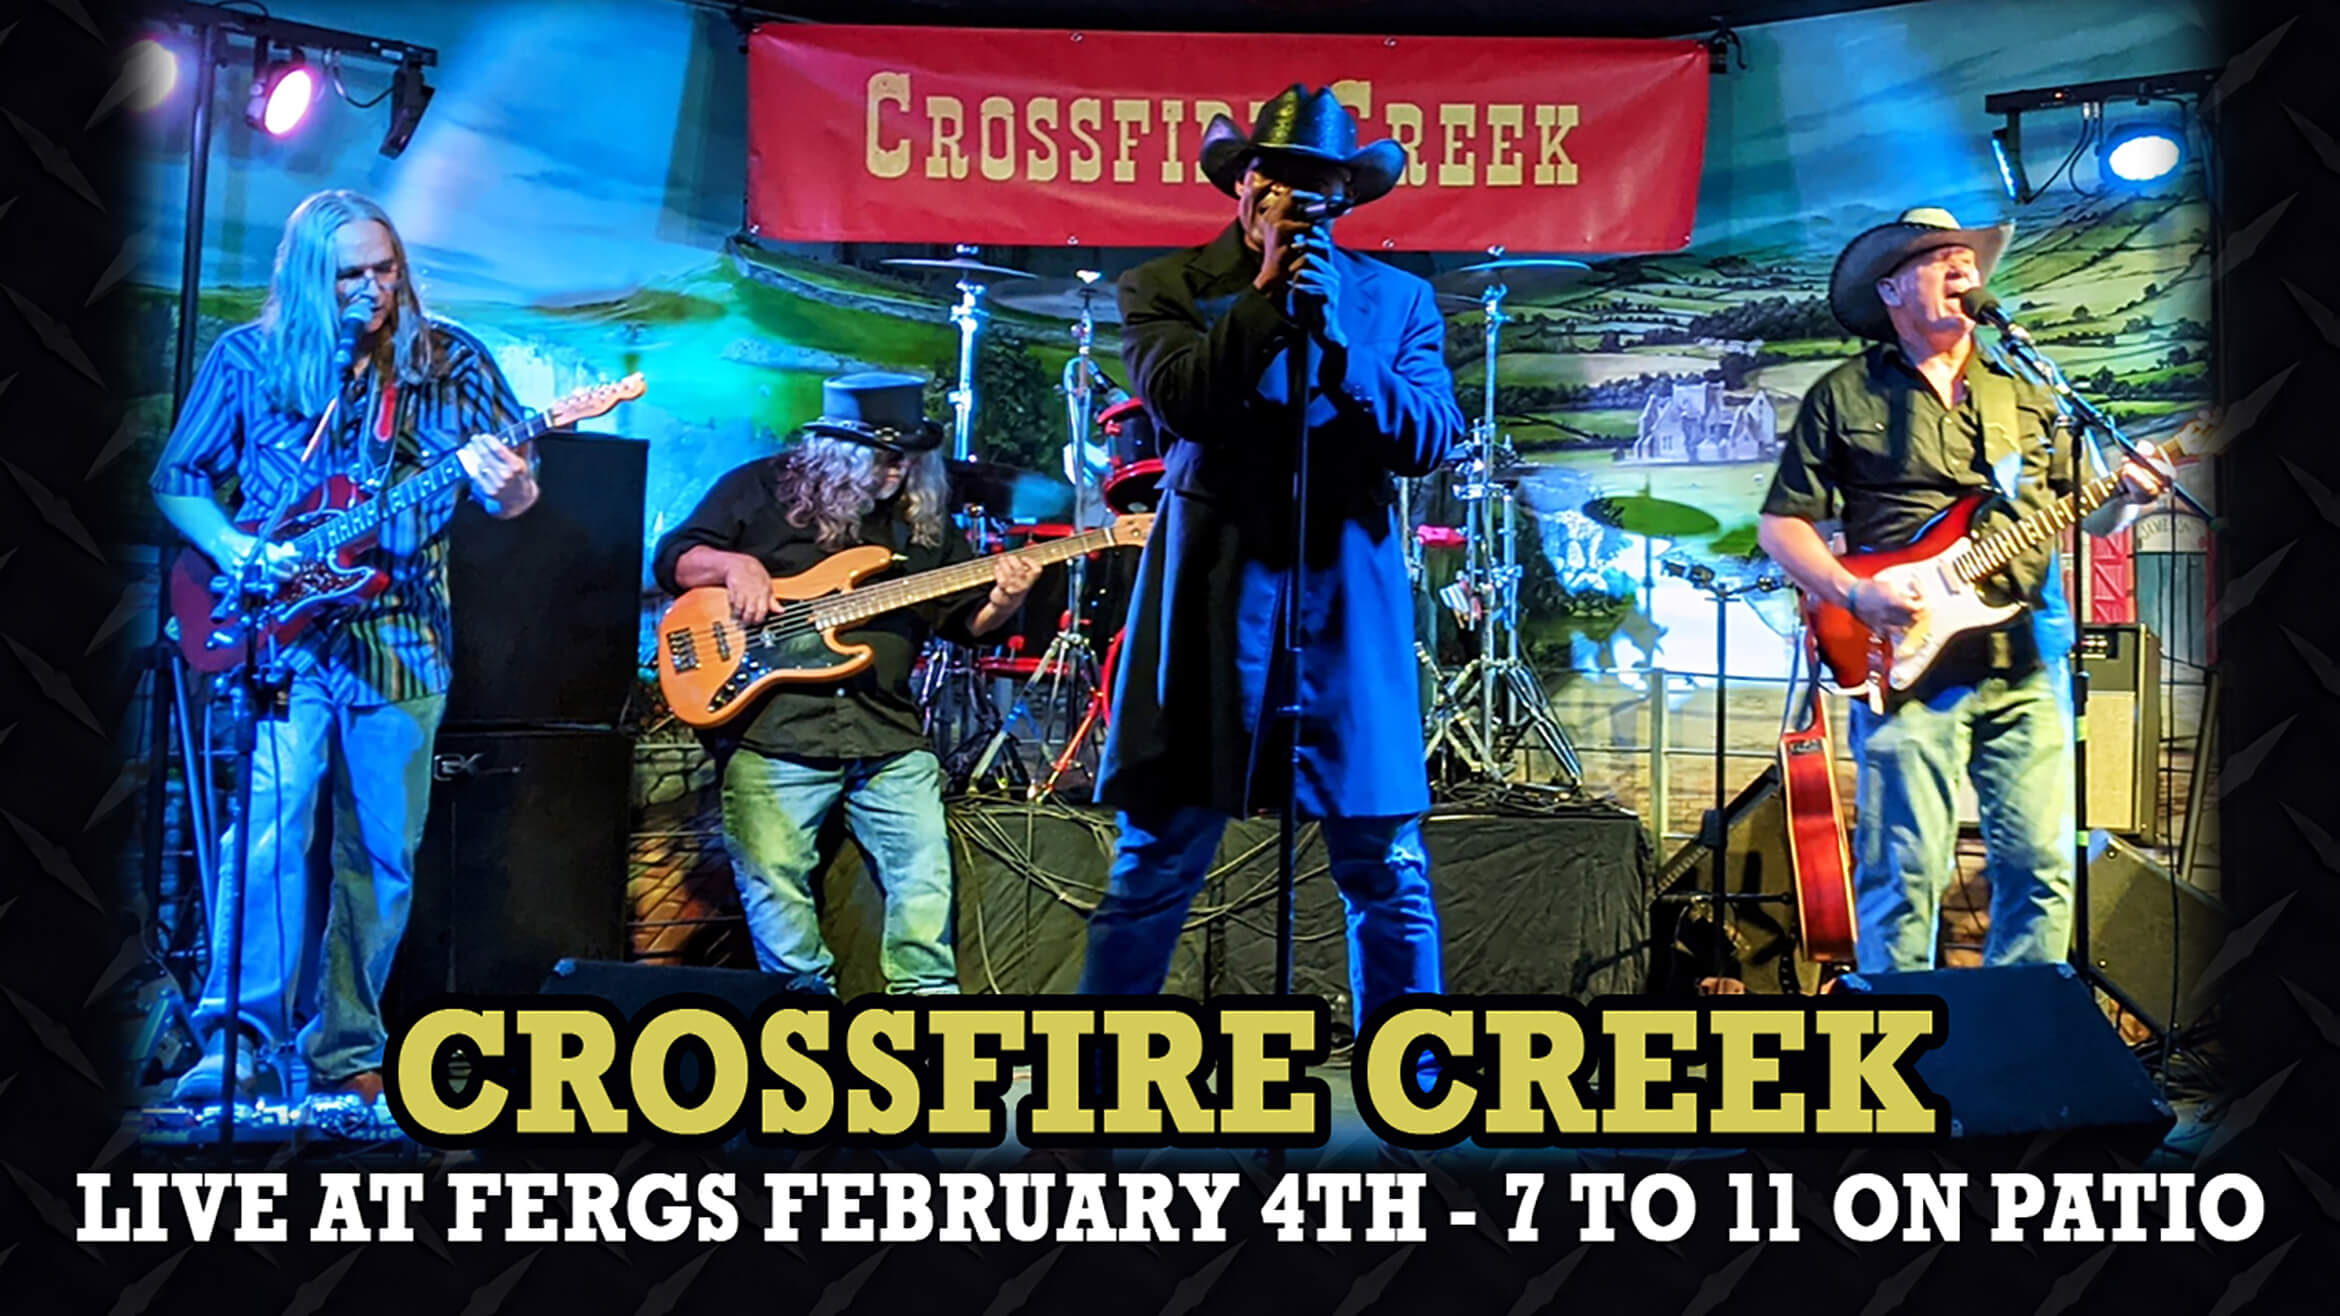 Crossfire Creek Band at Ferg's - February 4th, 2022